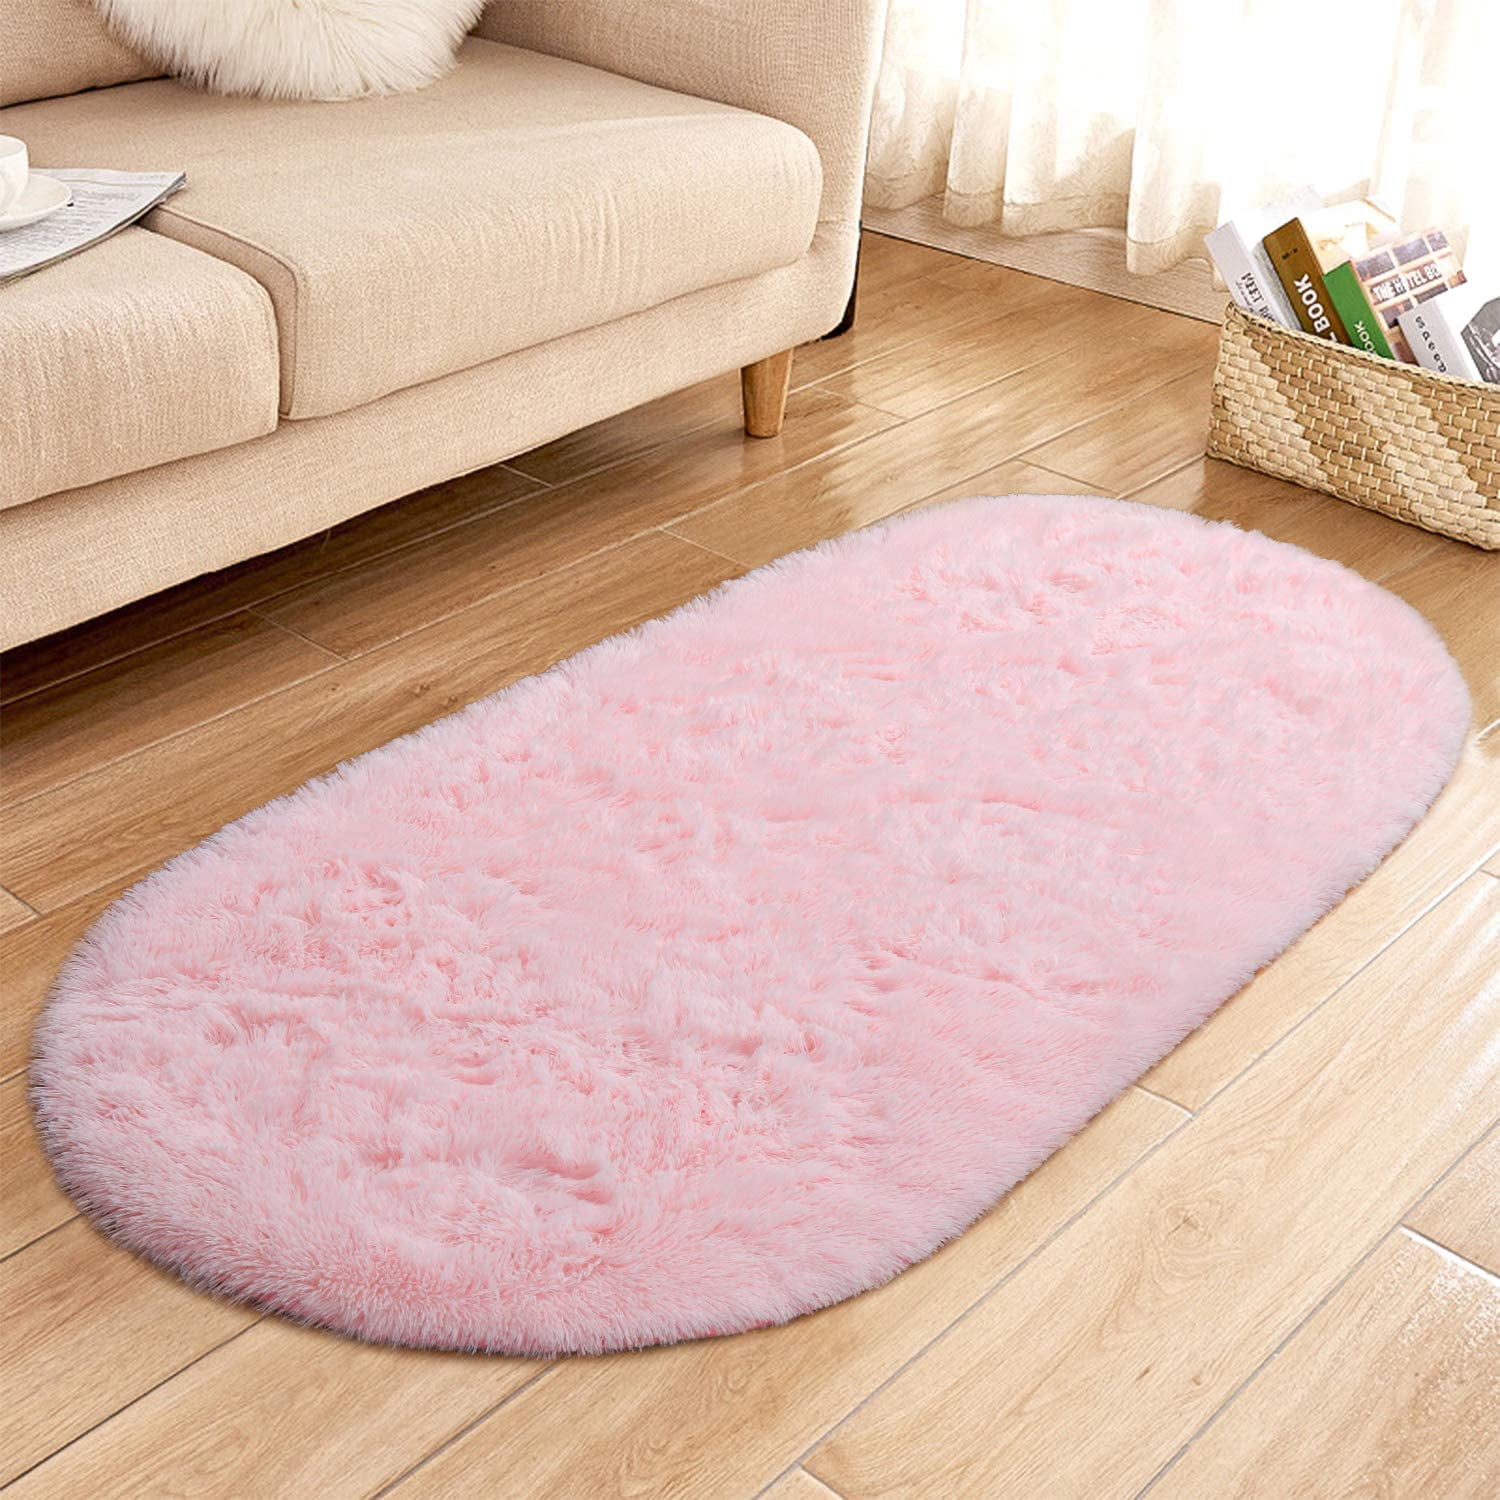 Soft Coral Velvet Washable Area Rug,Pink Purple Flowers and Swans Pattern Non Skid 63x48in Carpet,Home Decor for Bedroom Living Room 